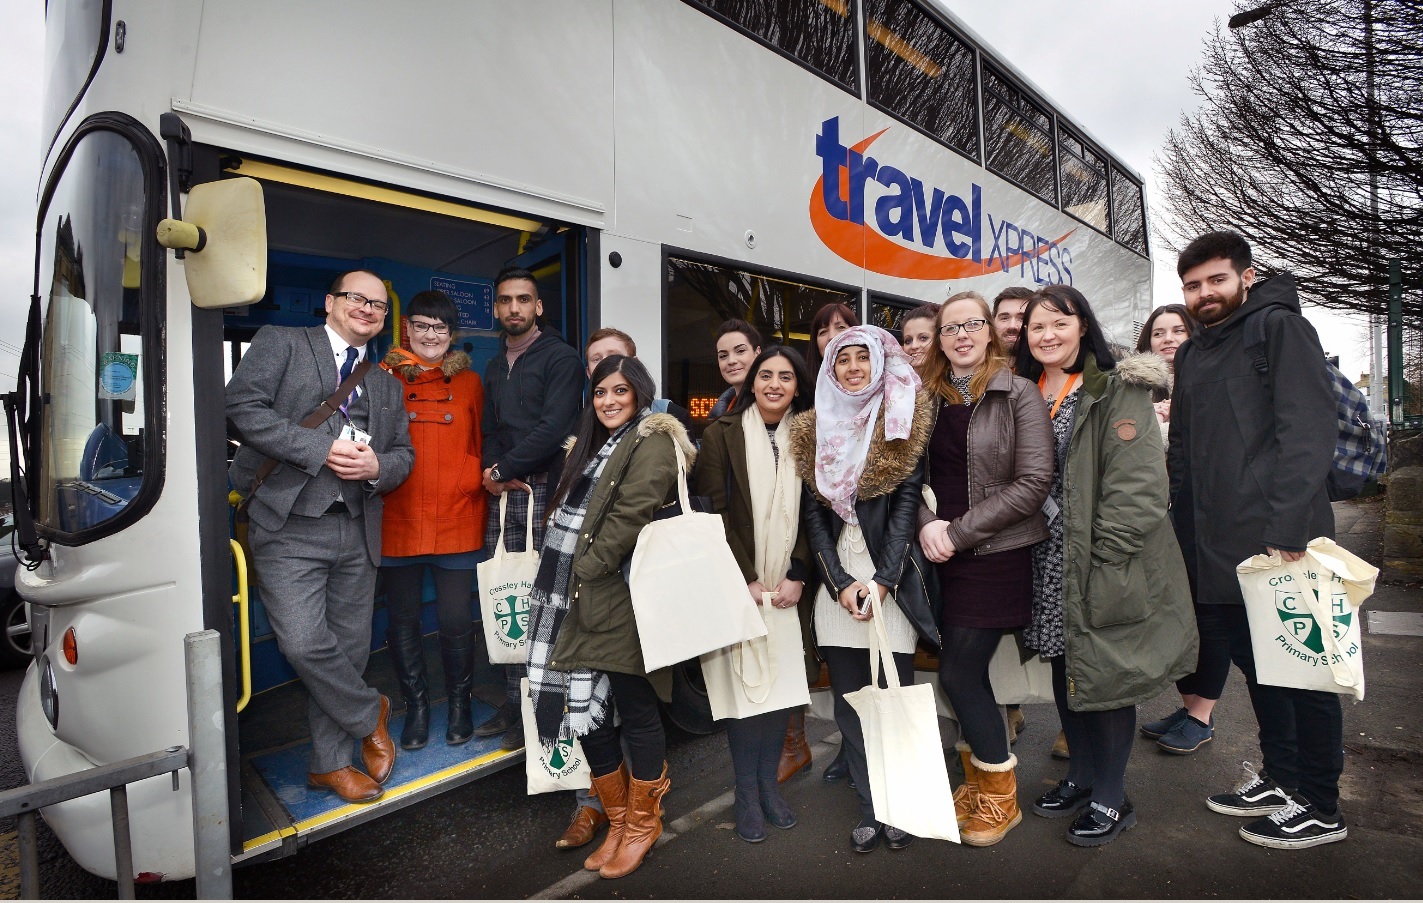 ALL ABOARD! Hundreds of teachers get bus tours of Bradford schools in drive to attract new talent